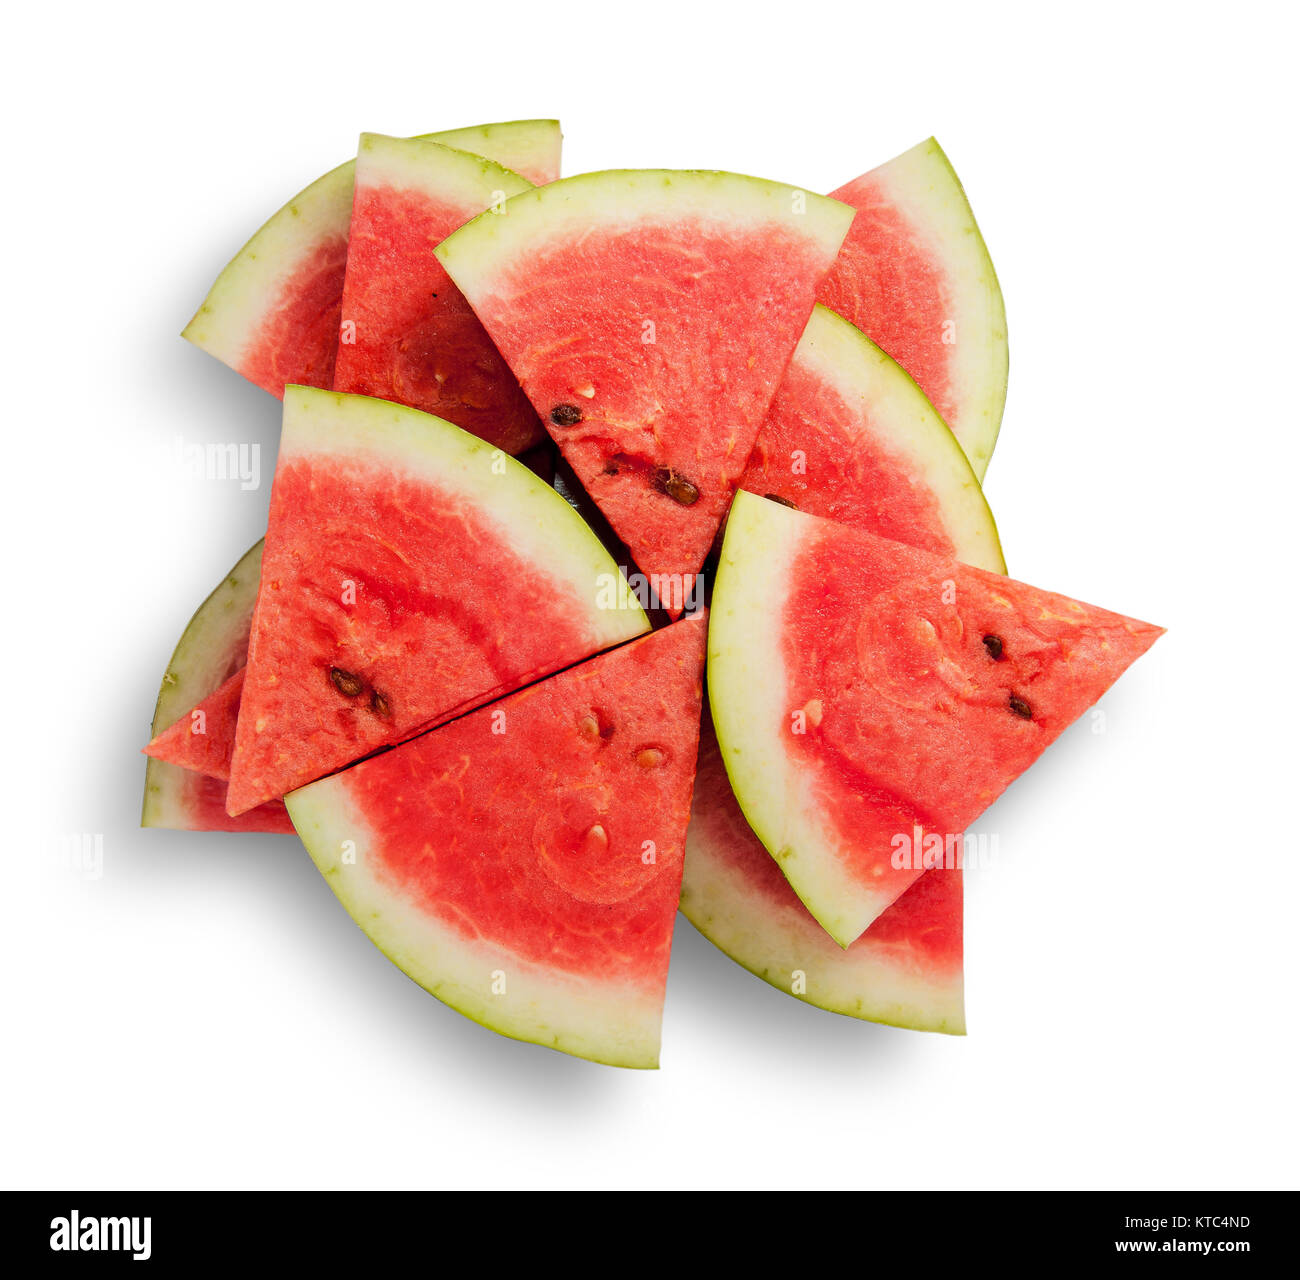 Slices of watermelon in a chaotic stack Stock Photo